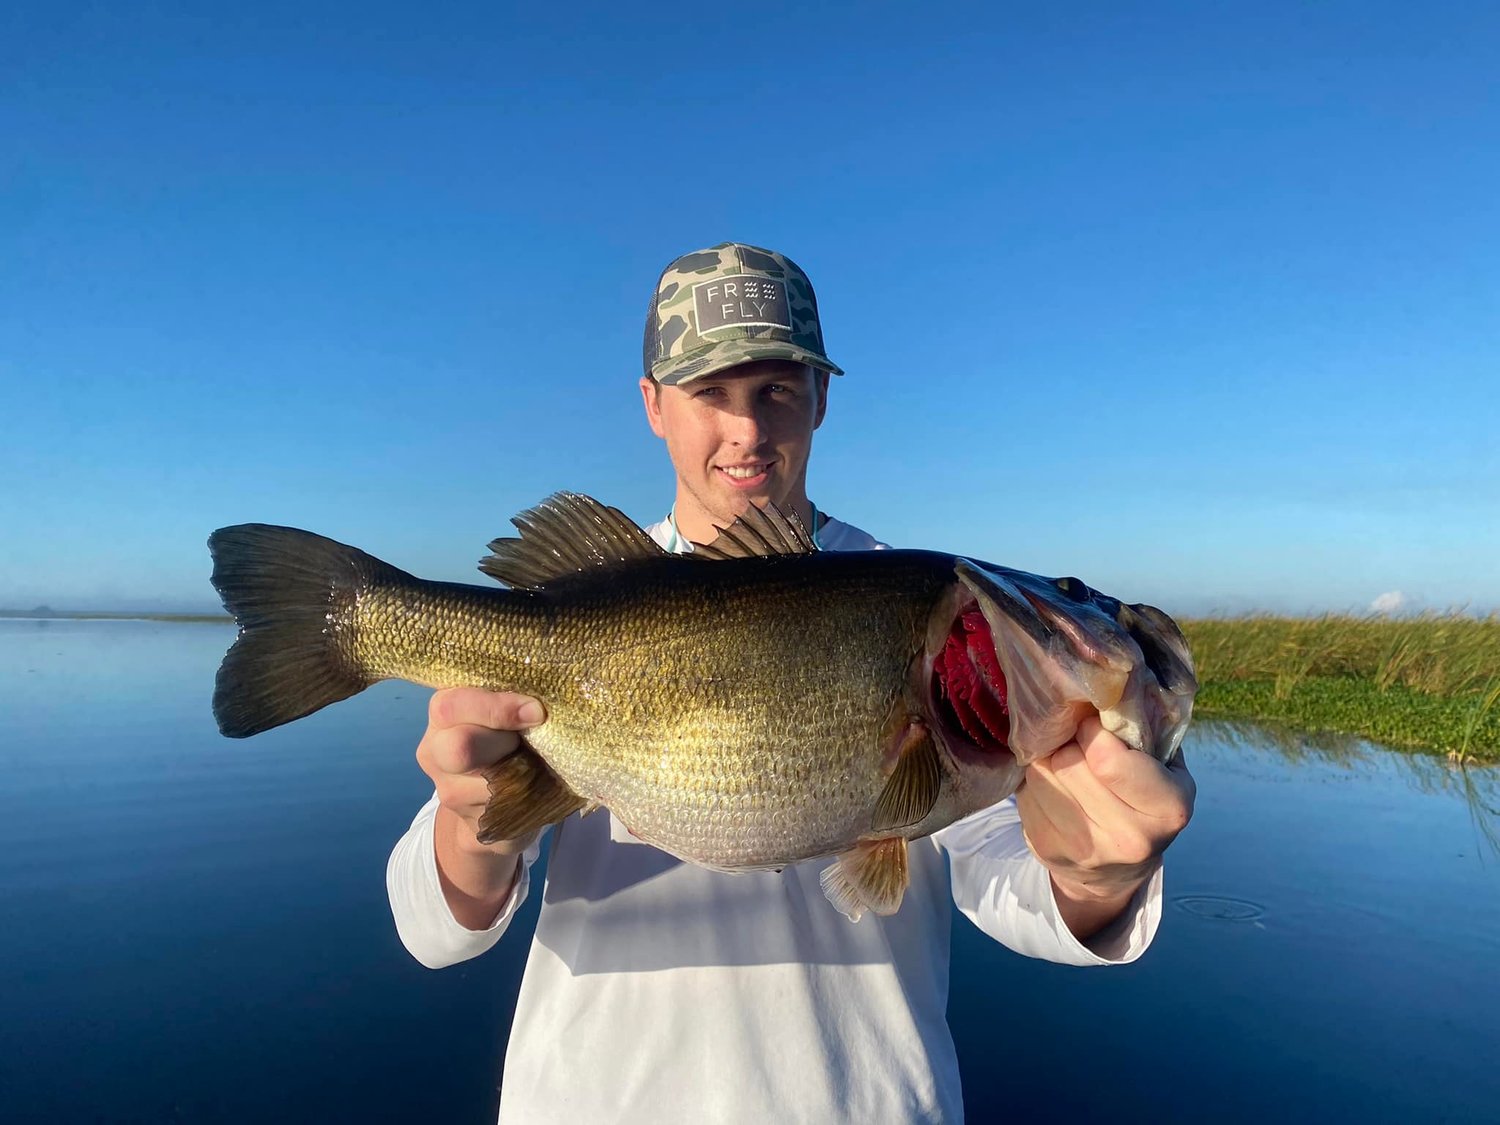 JJ Bass Fishing shared this photo from Lake Okeechobee on Sept. 14. "Let's go fishing!" they shared. [Photo courtesy JJ Bass Fishing]